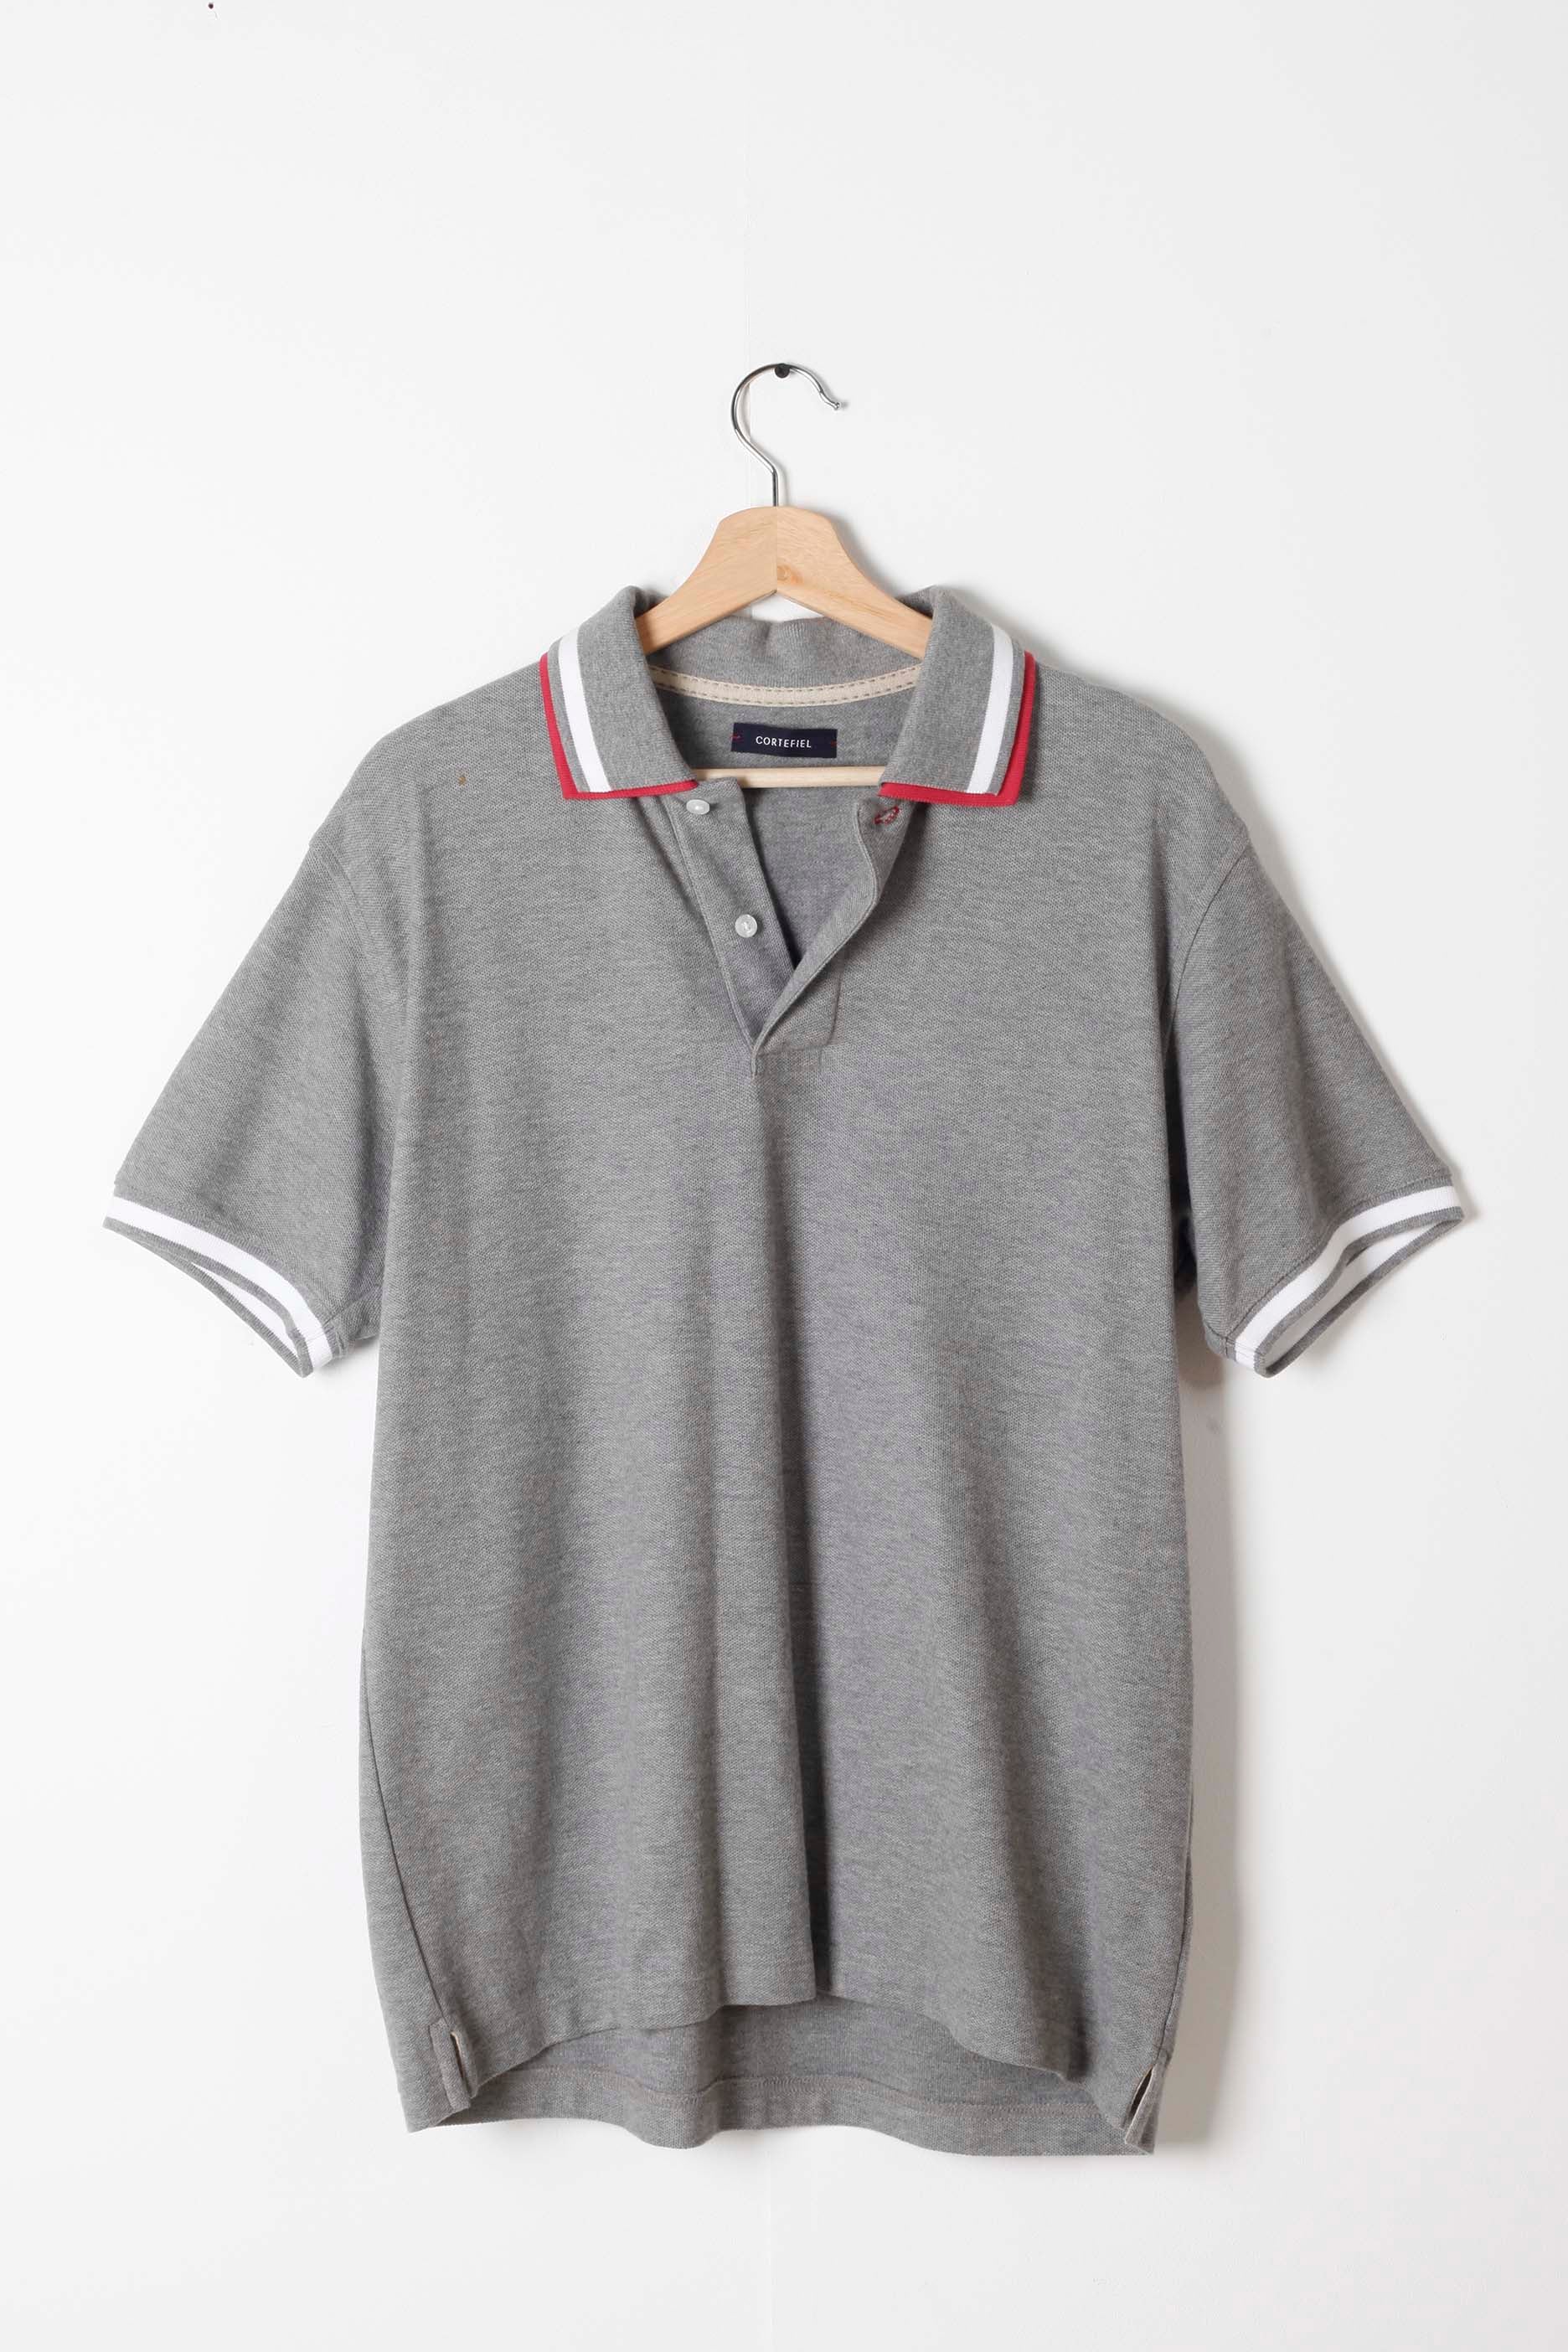 Mens Grey Polo Shirt with Red/White Collar (Large)